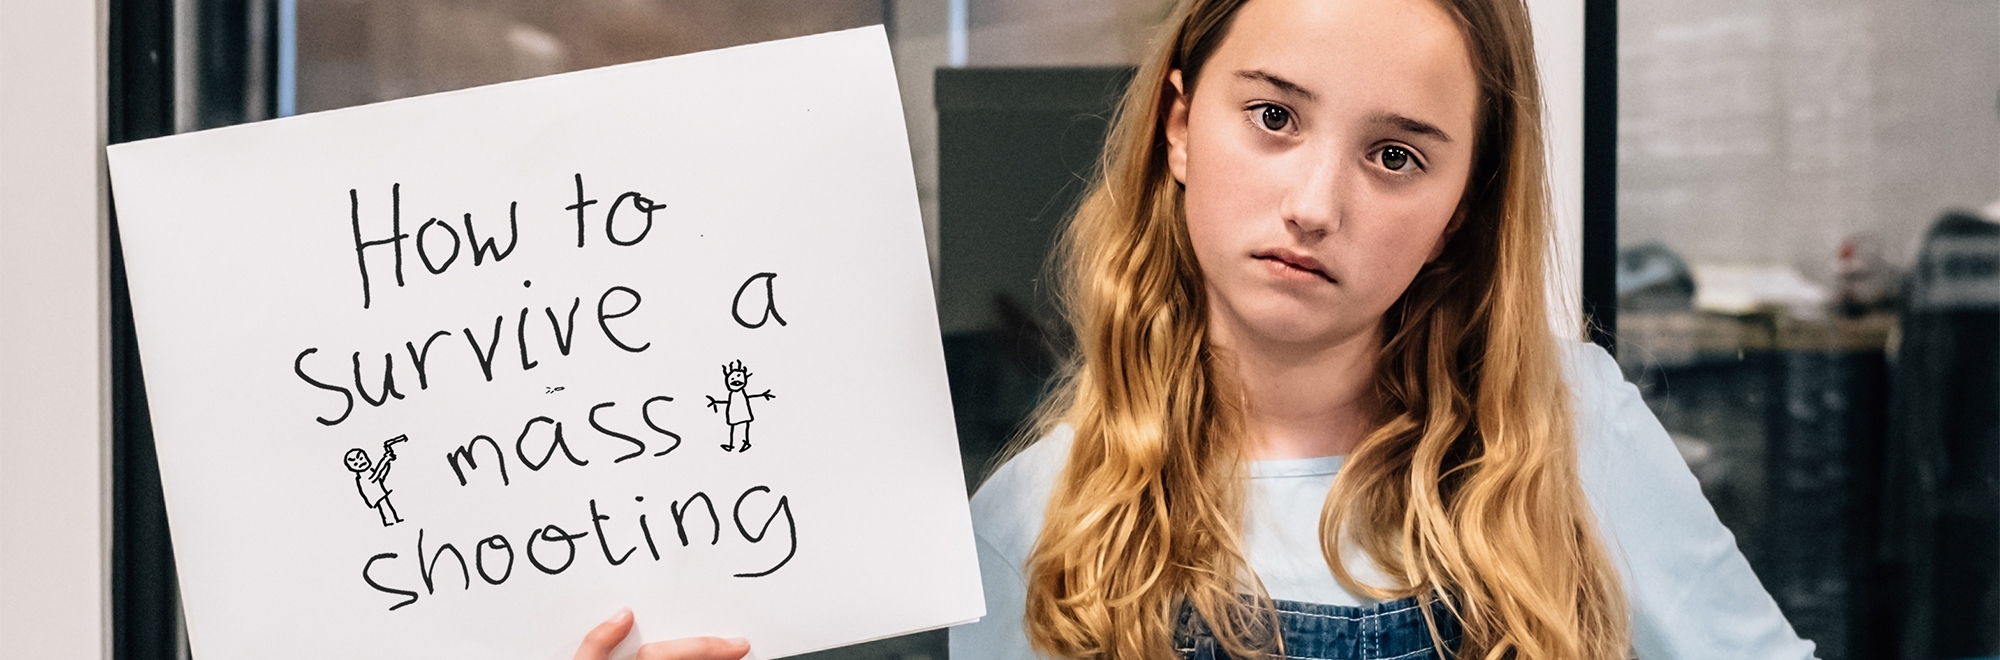 March For Our Lives campaign features a schoolgirl teaching adults the shooter safety training